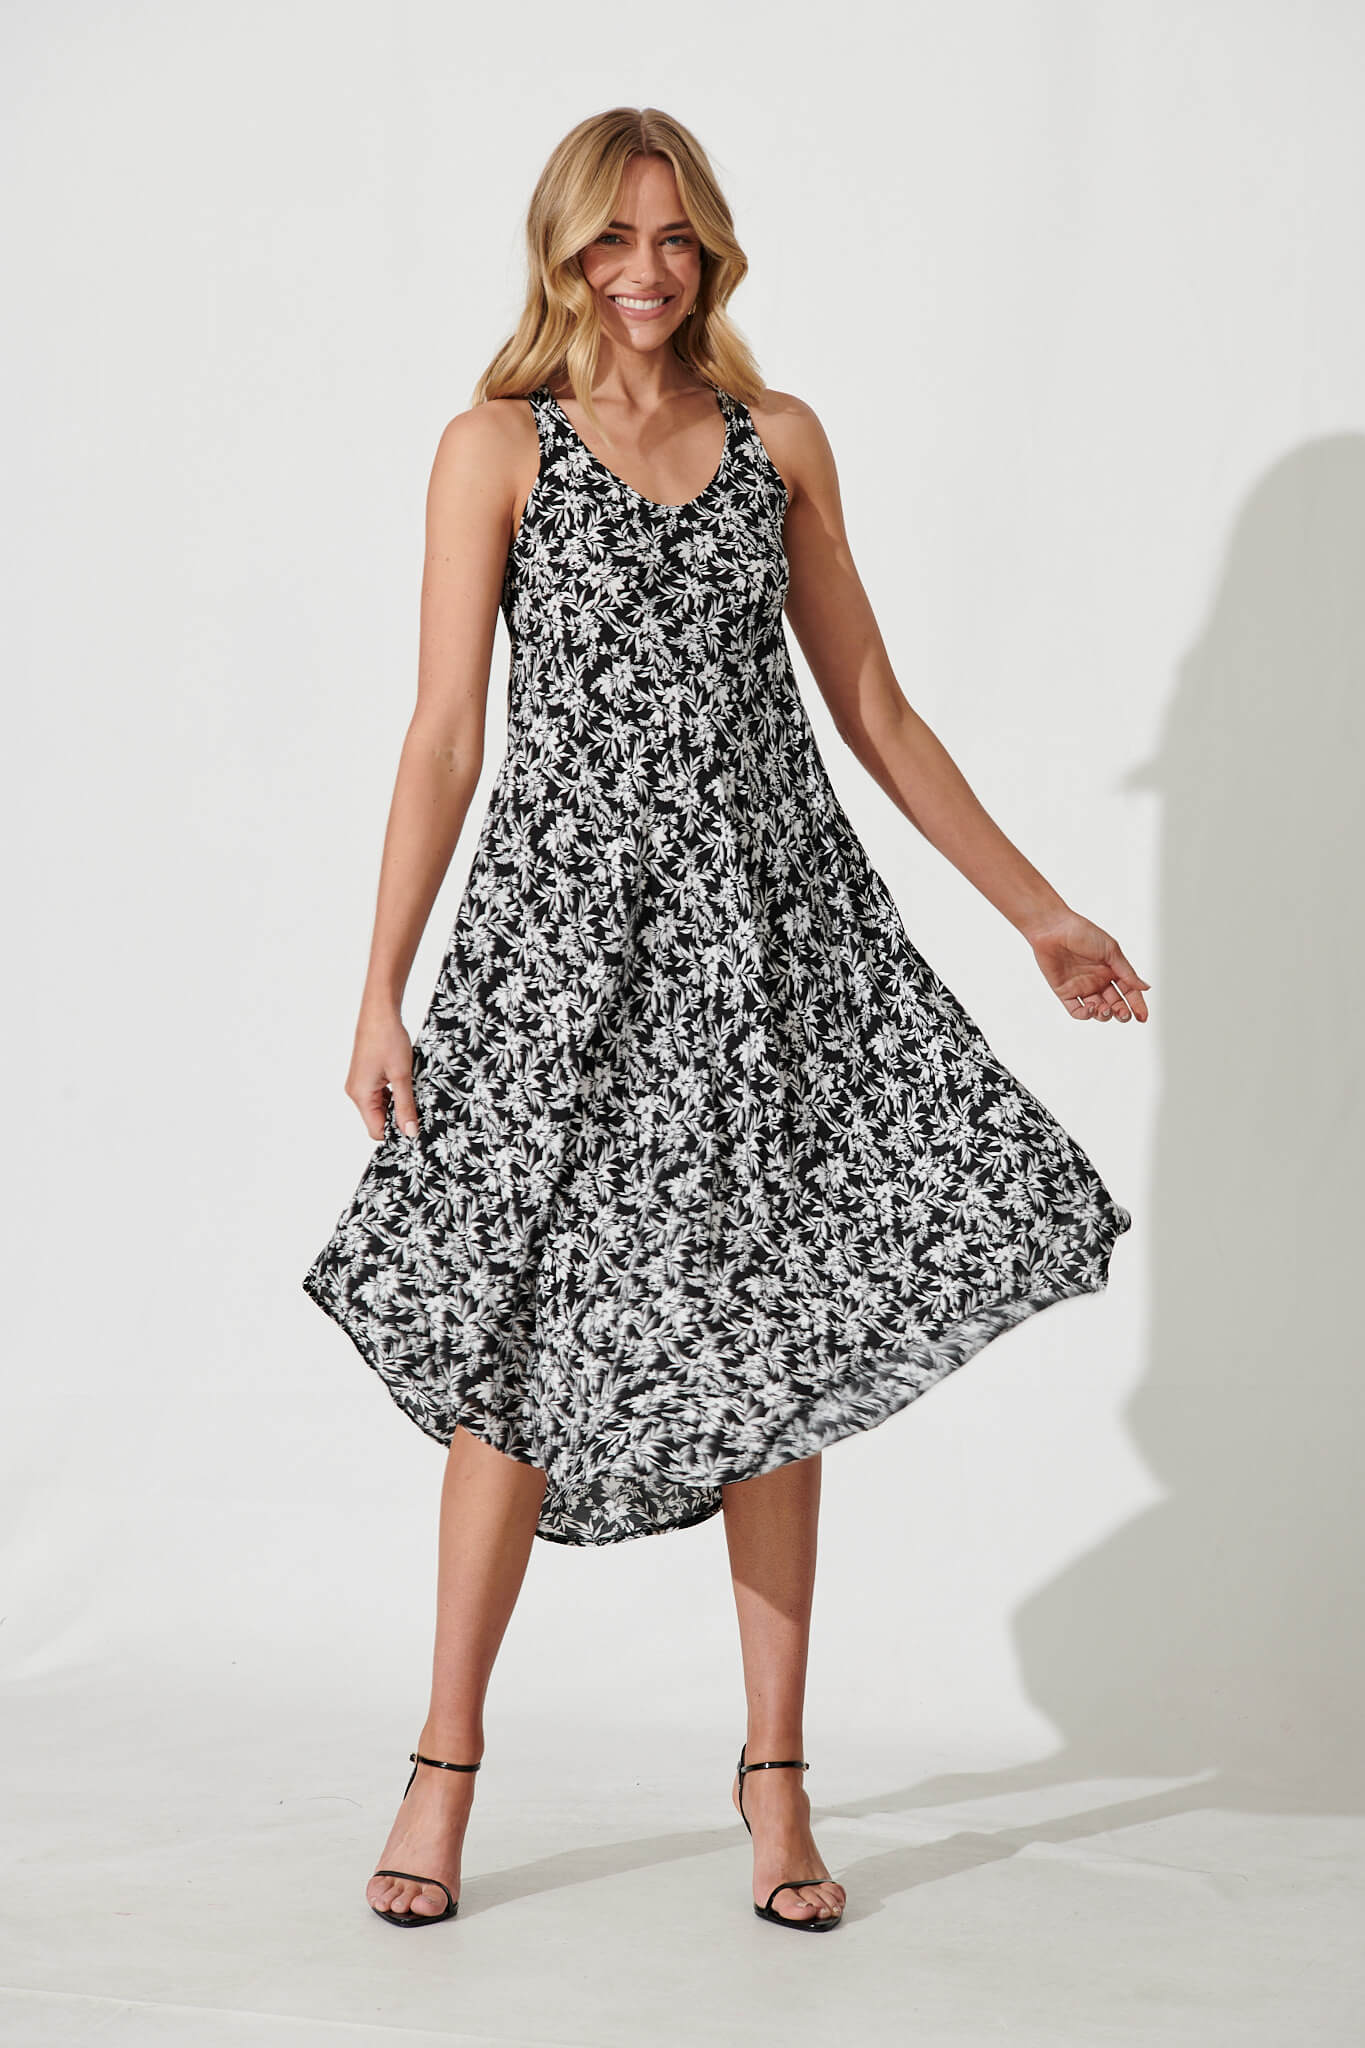 Two Of Us Midi Dress In Black With White Floral Print - full length